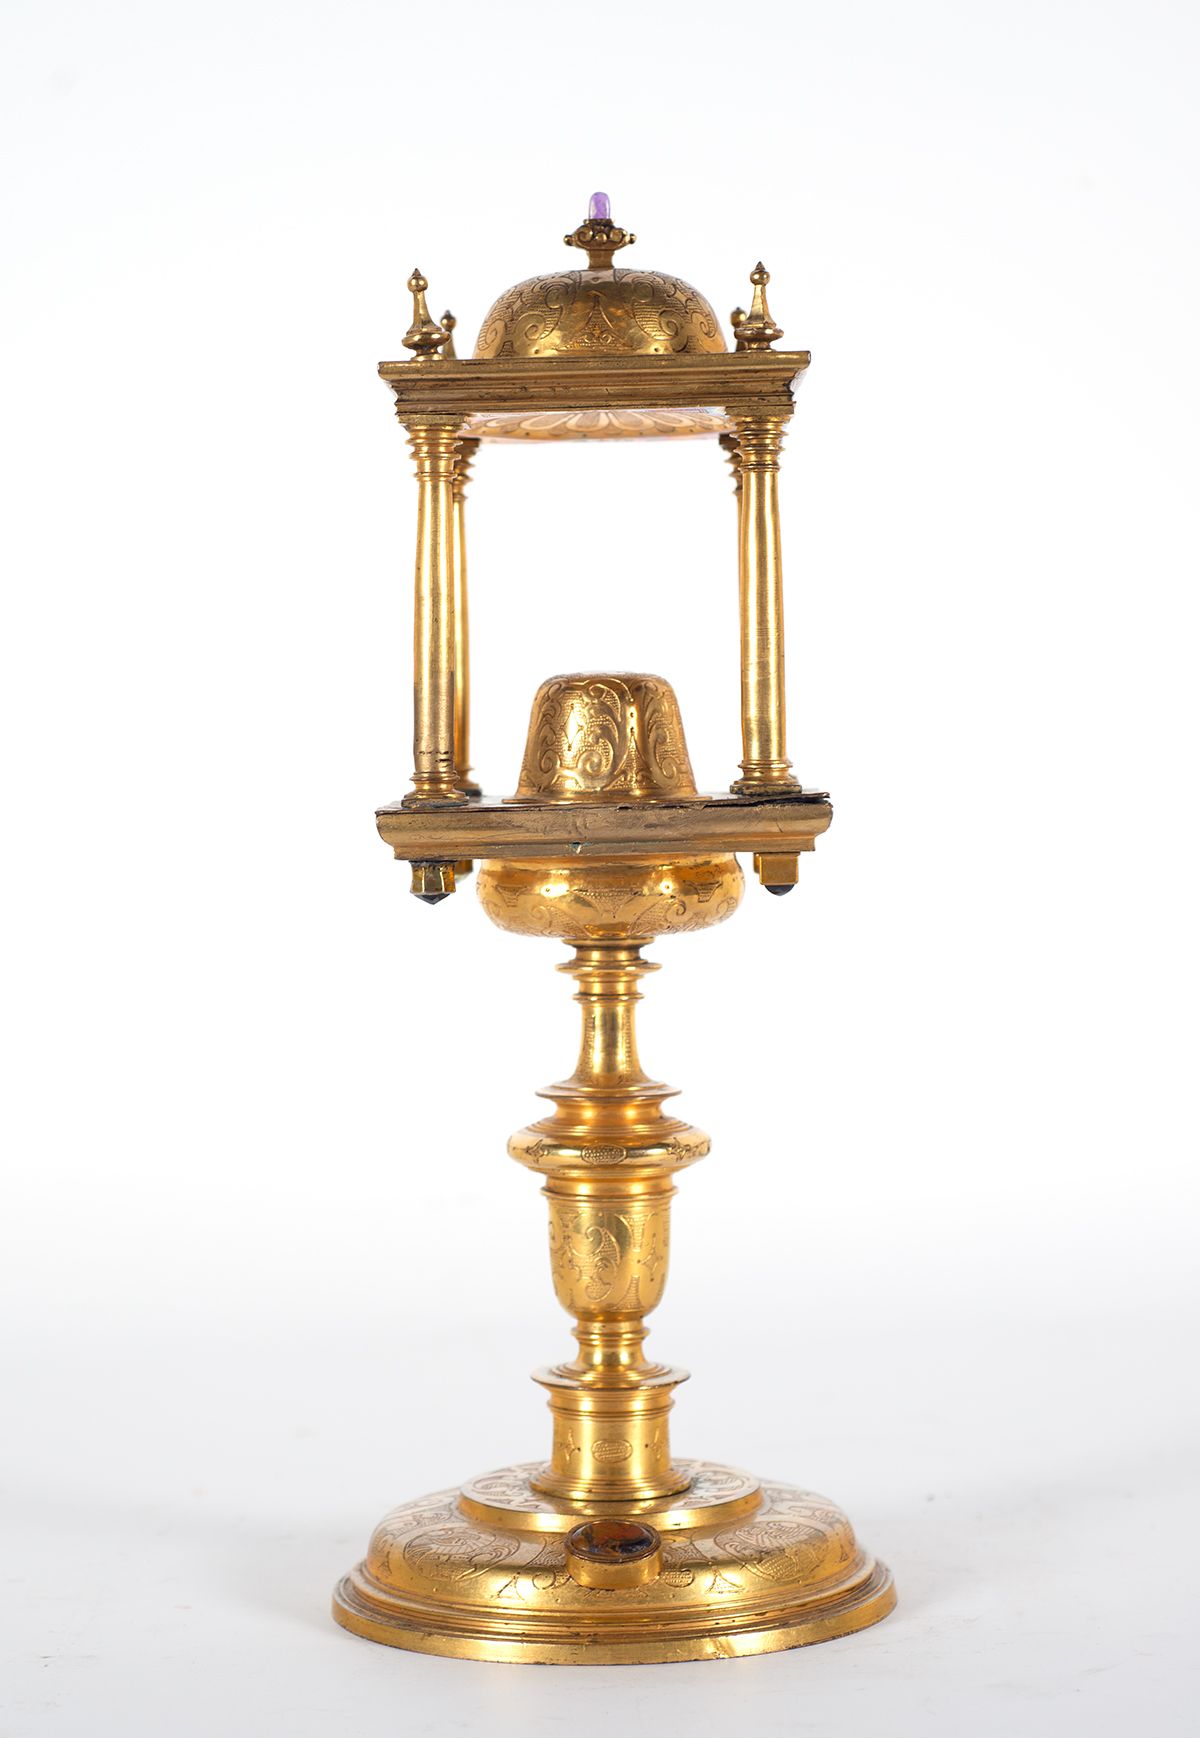 Important monstrance in gilded bronze from the 16th century Maße: 37 x 11 cm